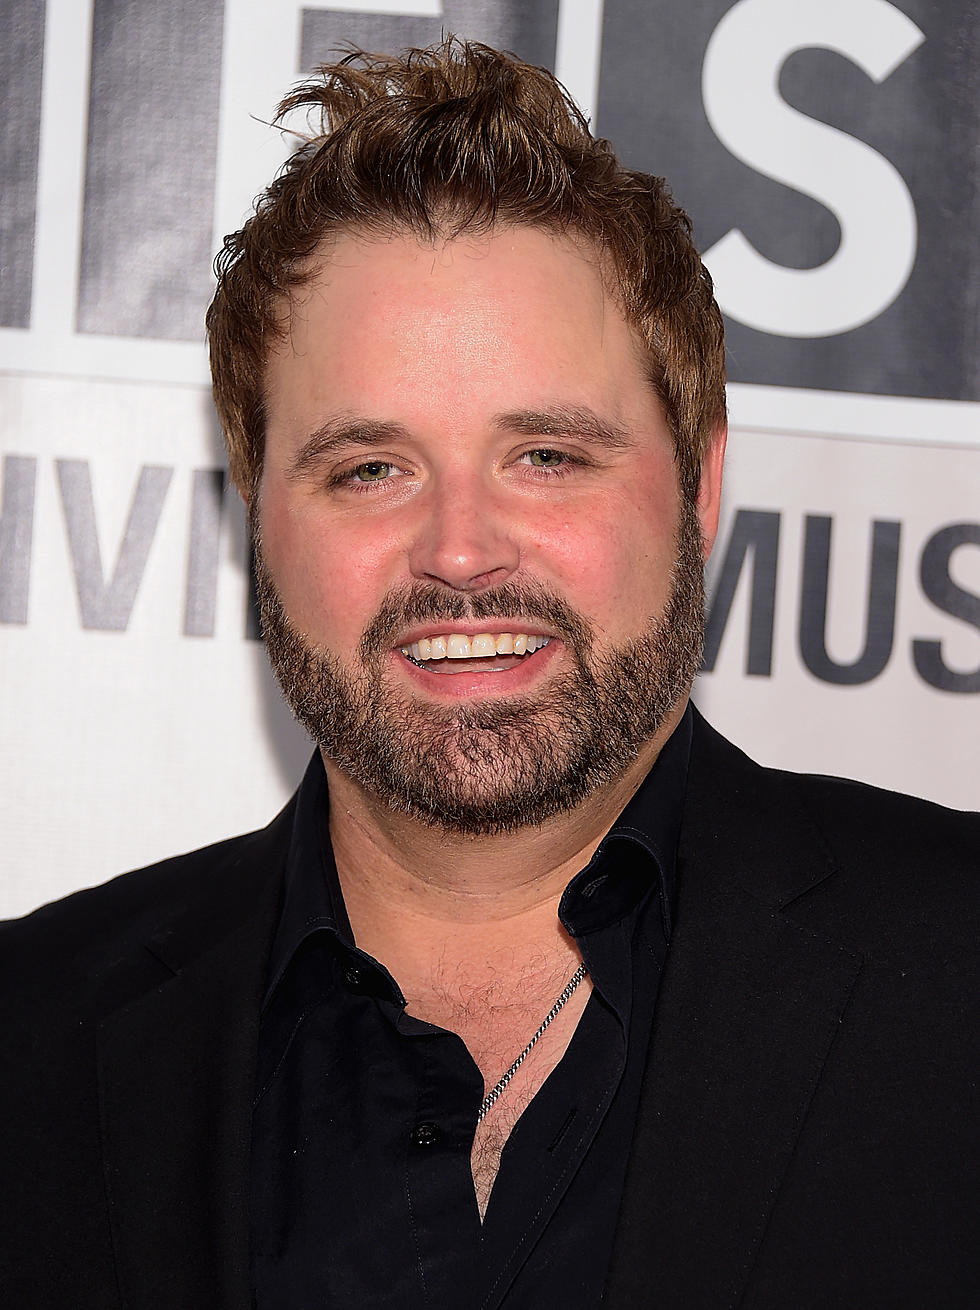 Randy Houser Drops Lyric Video for New Single ‘Back’ – [WATCH]